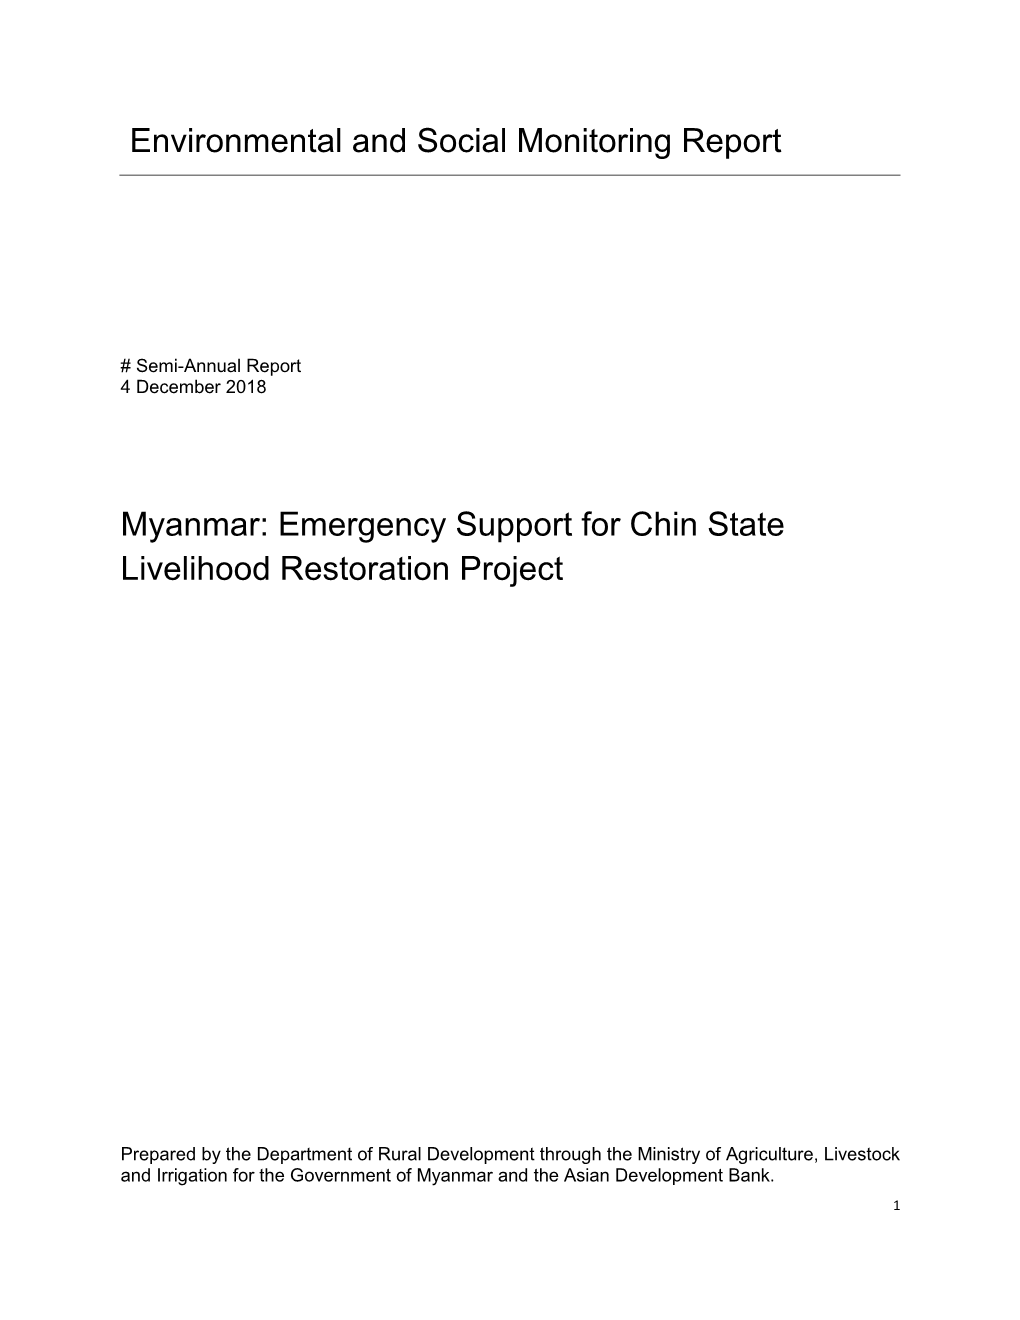 49334-001: Emergency Support for Chin State Livelihood Restoration